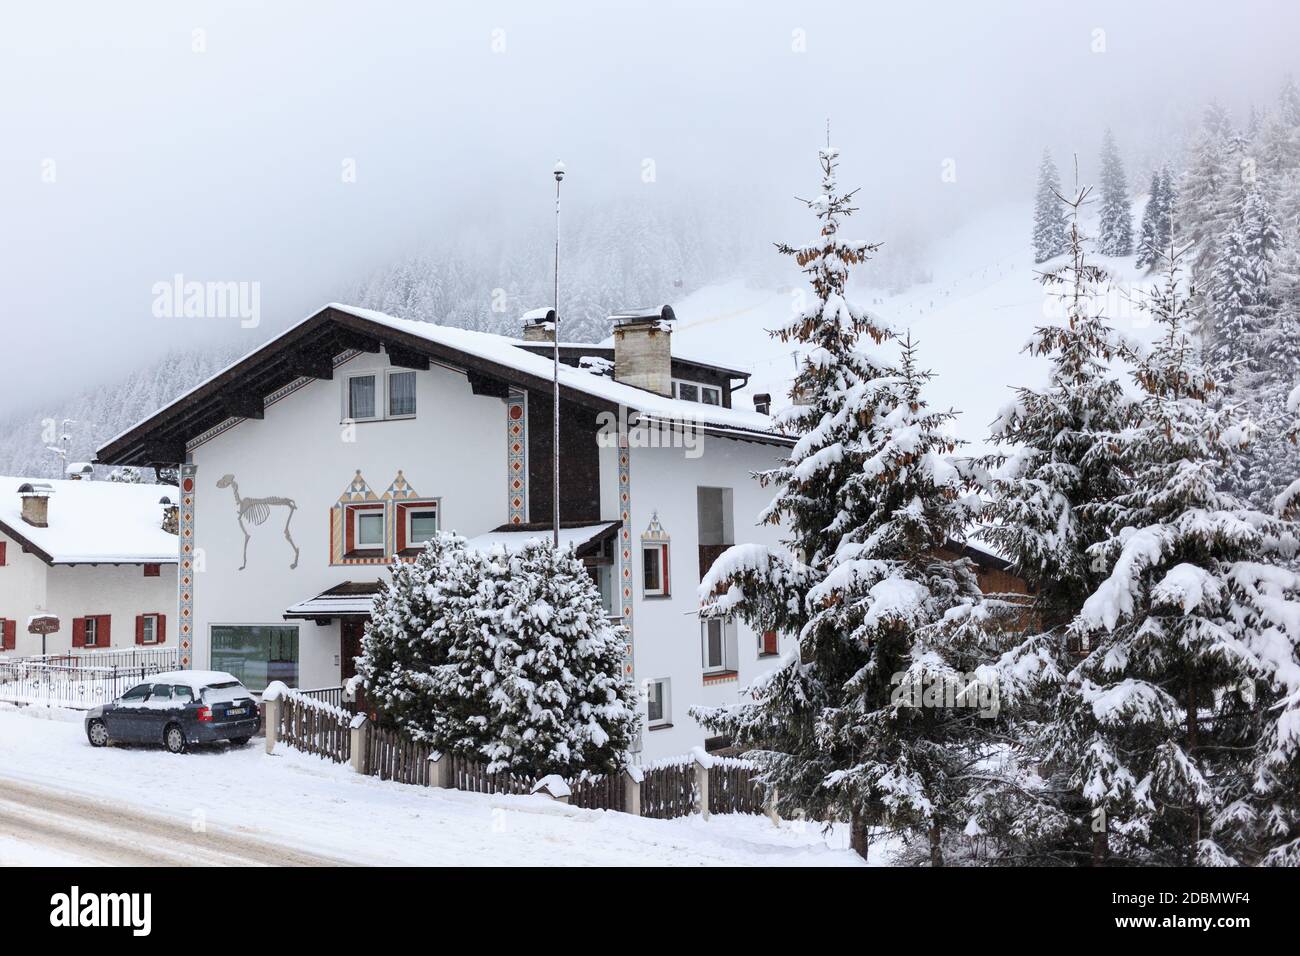 Street view with traditional hotel, car with fresh snow on an overcast day, Selva Gardena, Dolomites, Italy Stock Photo